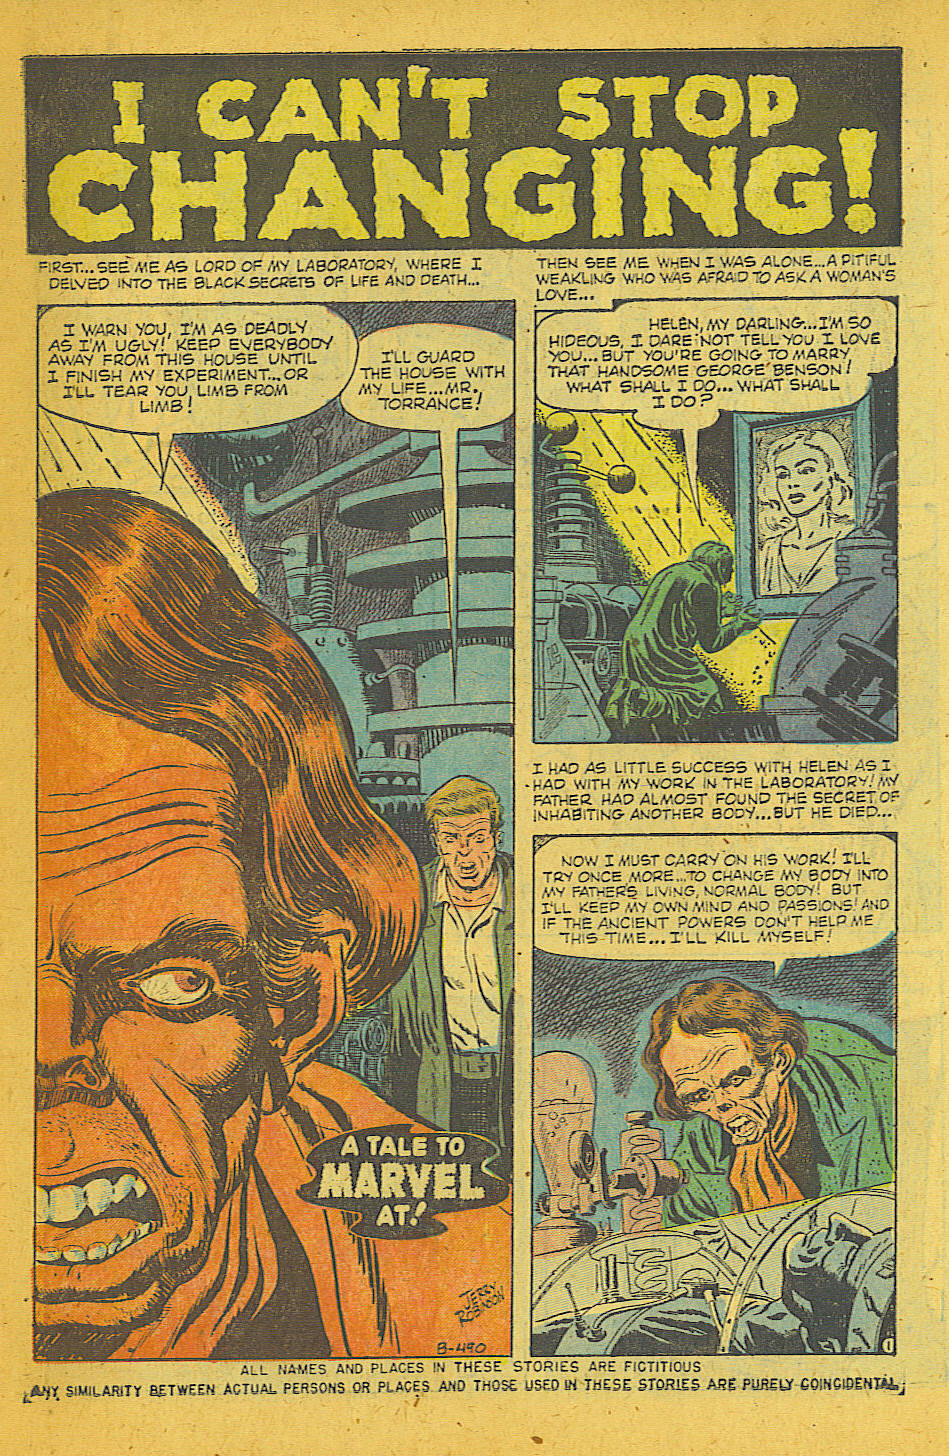 Marvel Tales (1949) 111 Page 1